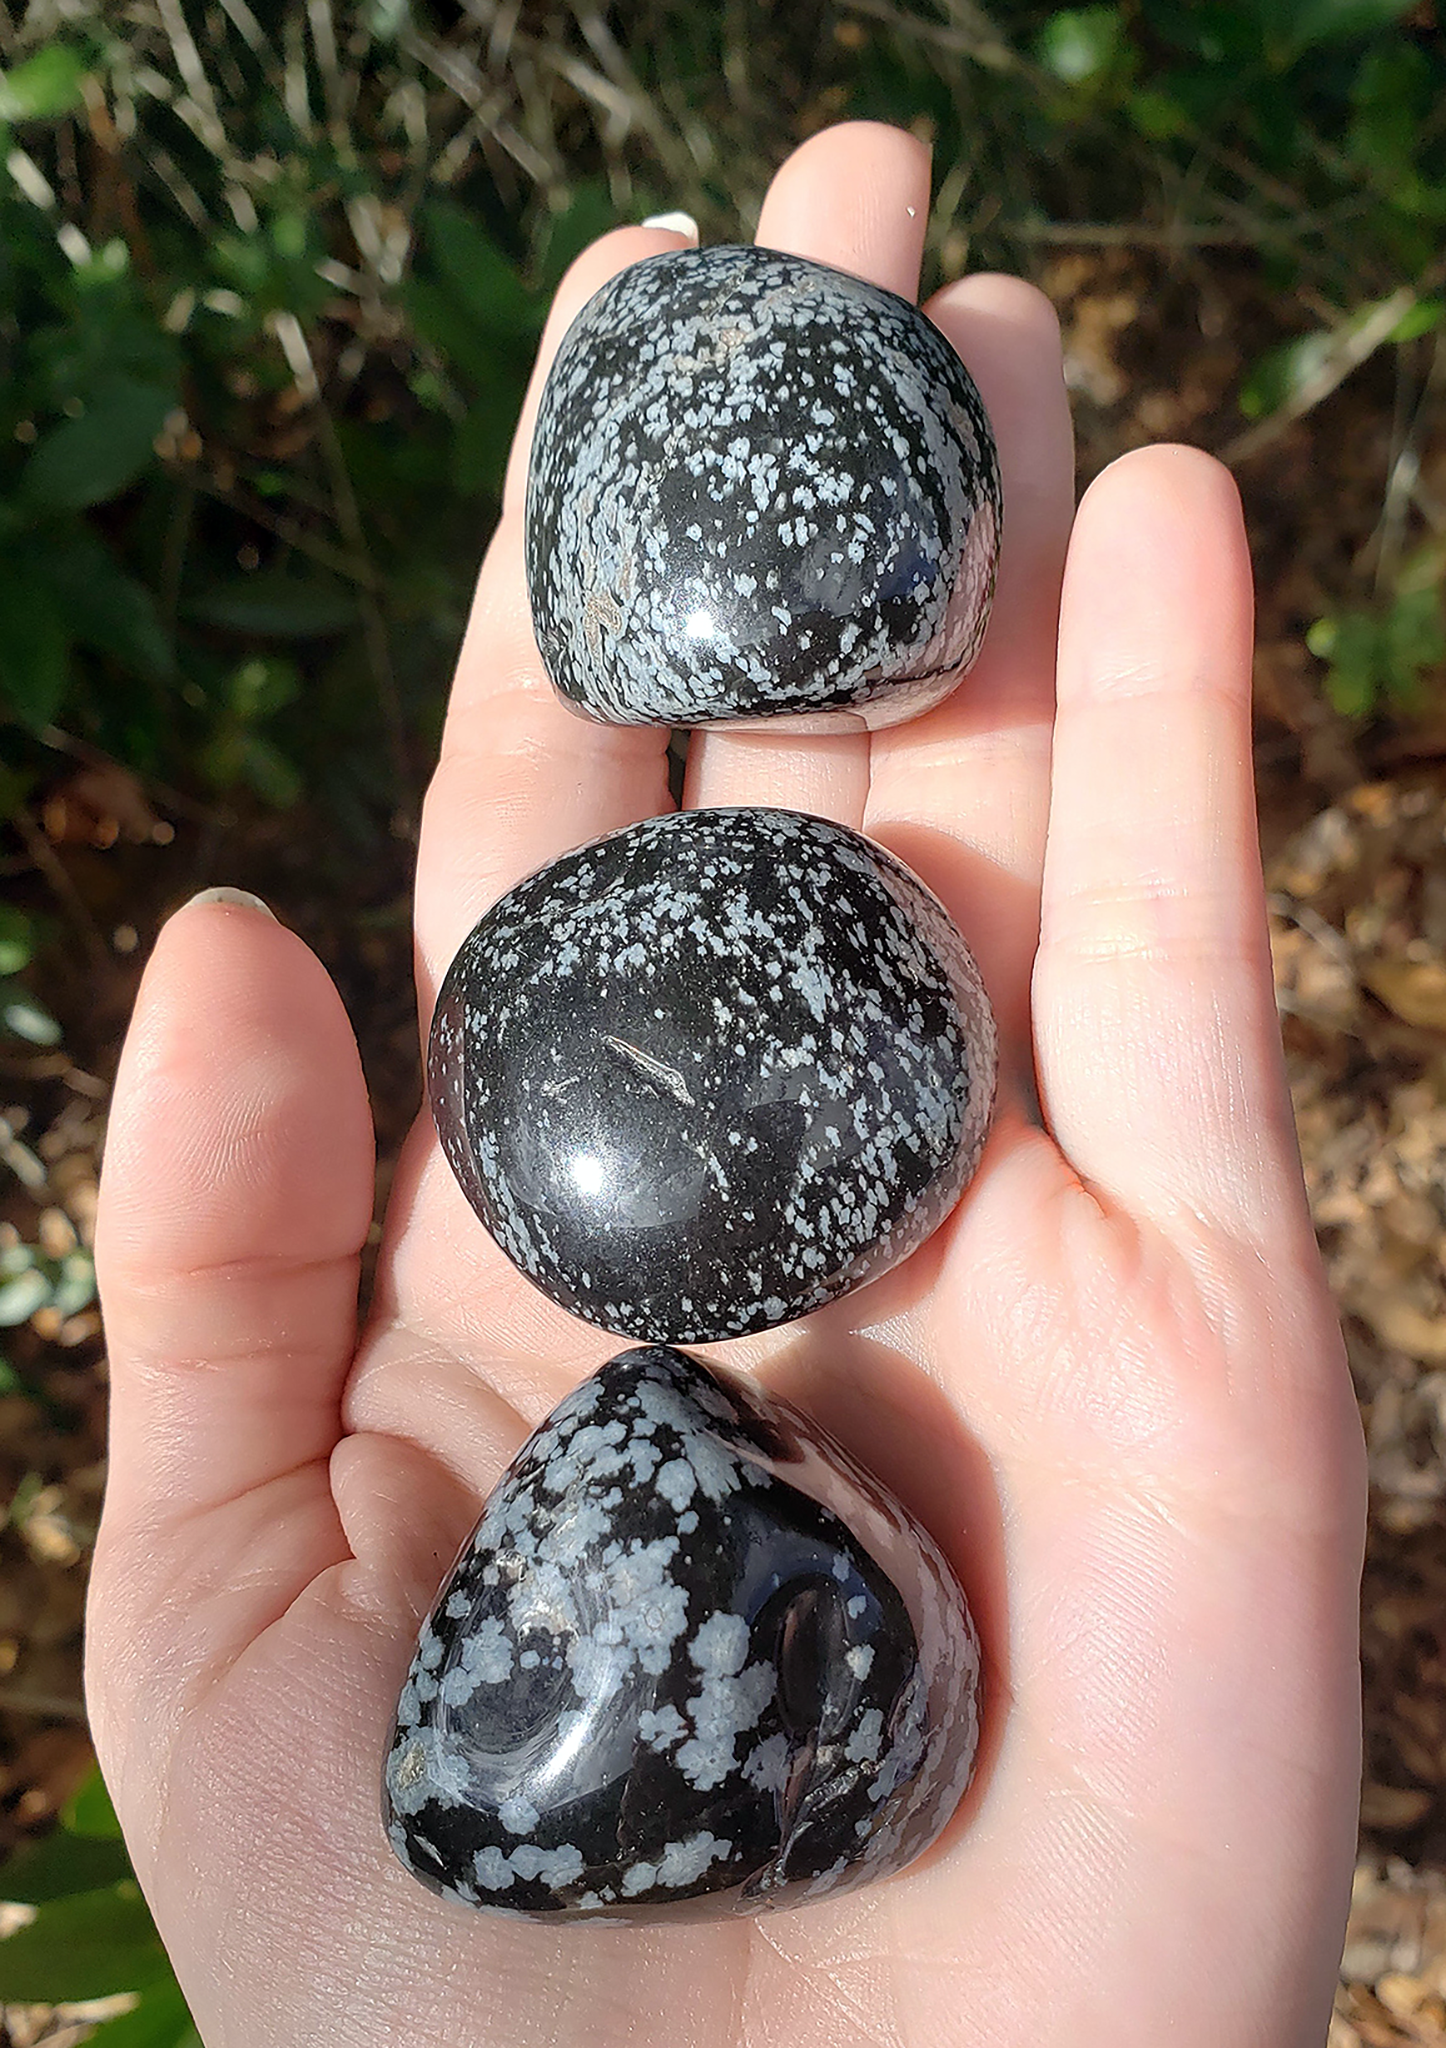 Snowflake Obsidian Tumbled Natural Gemstone - Stone of Purging Negativity - Large Freeform:1&quot; - 1.5&quot;